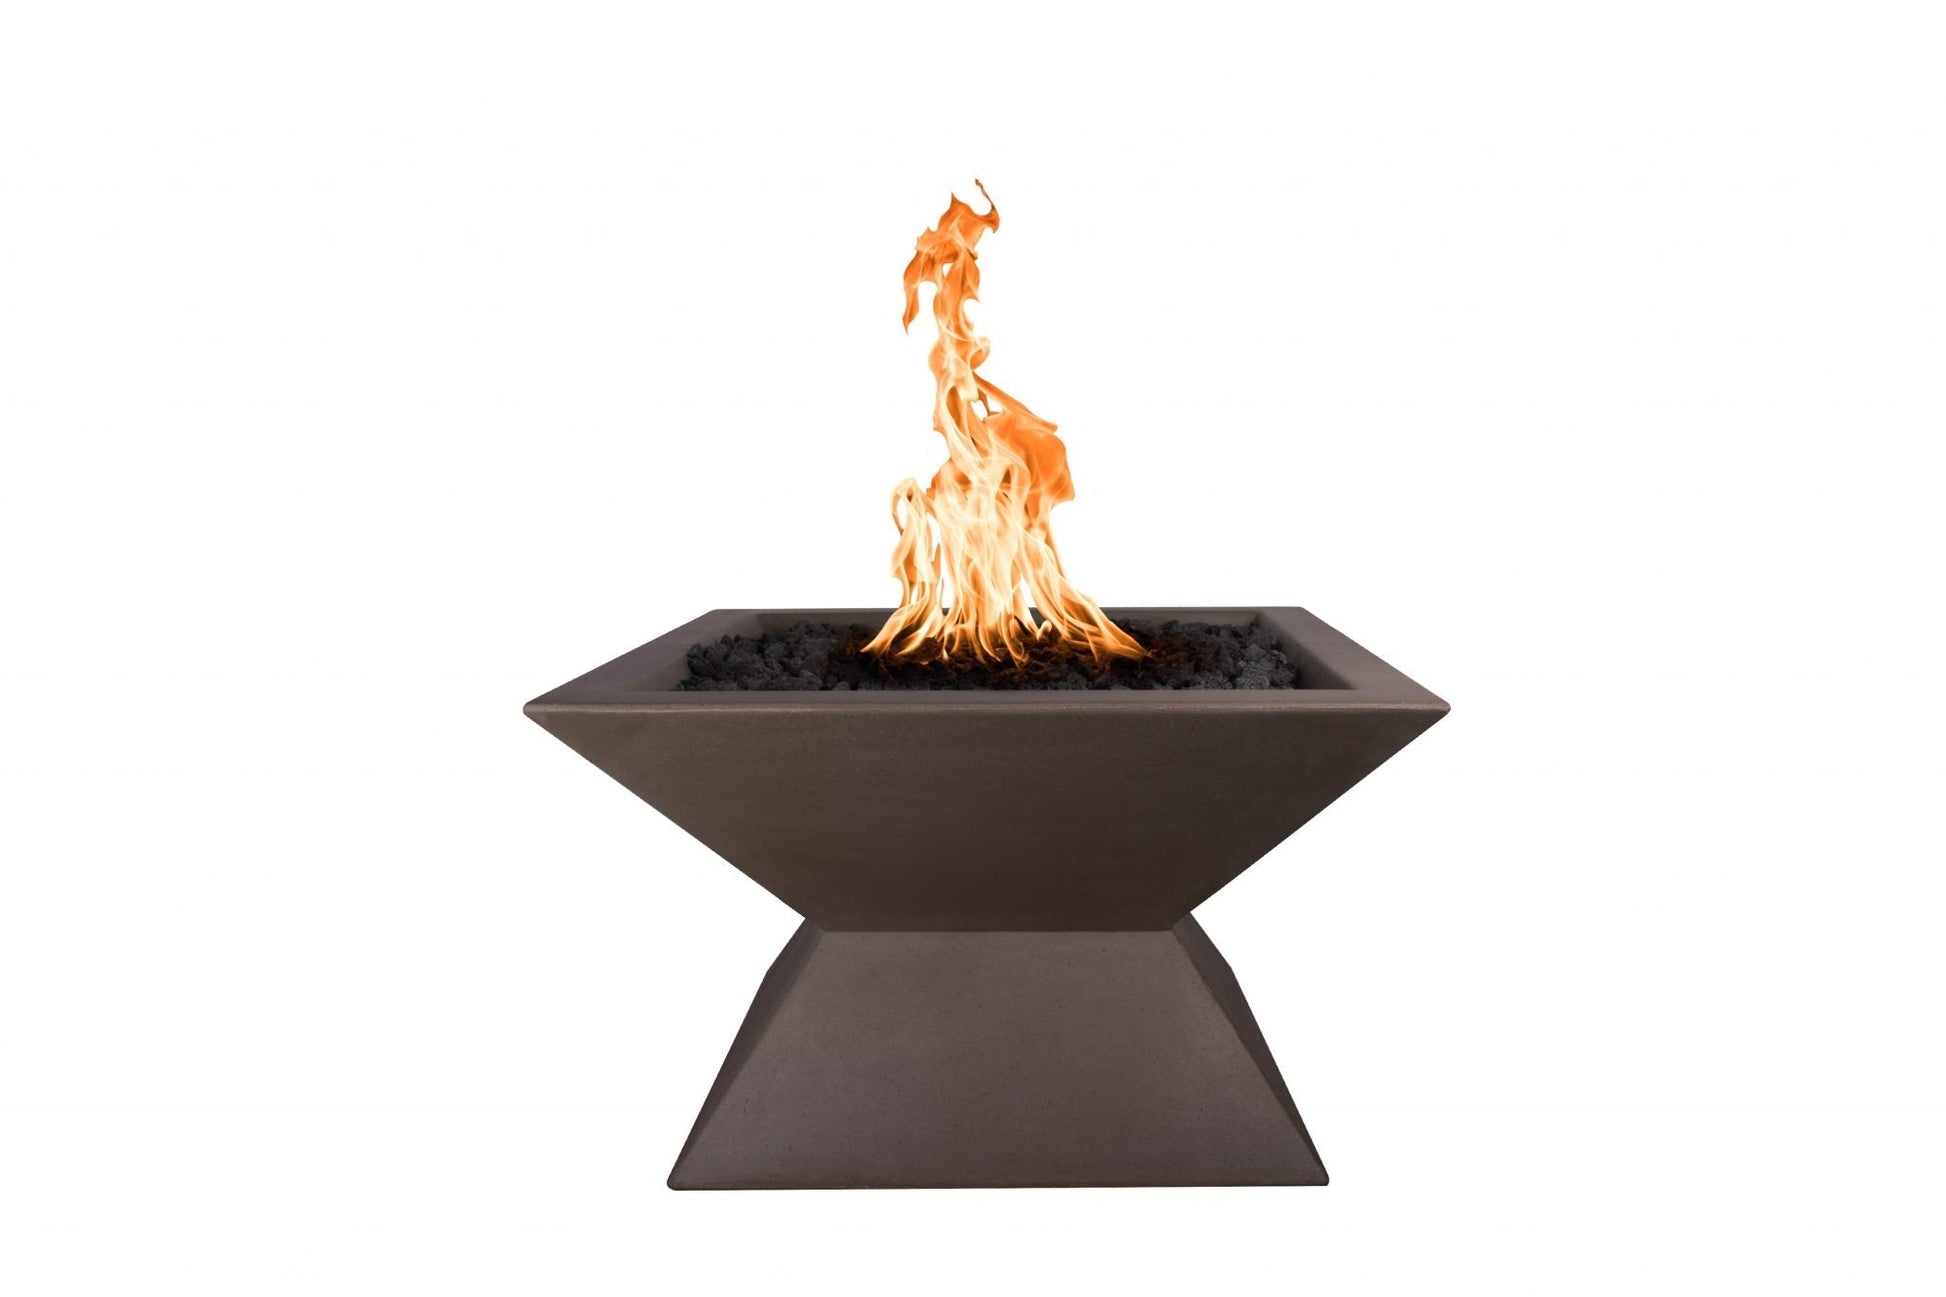 The Outdoor Plus Square Uxmal 30" Rustic Coffee GFRC Concrete Liquid Propane Fire Pit with Match Lit Ignition